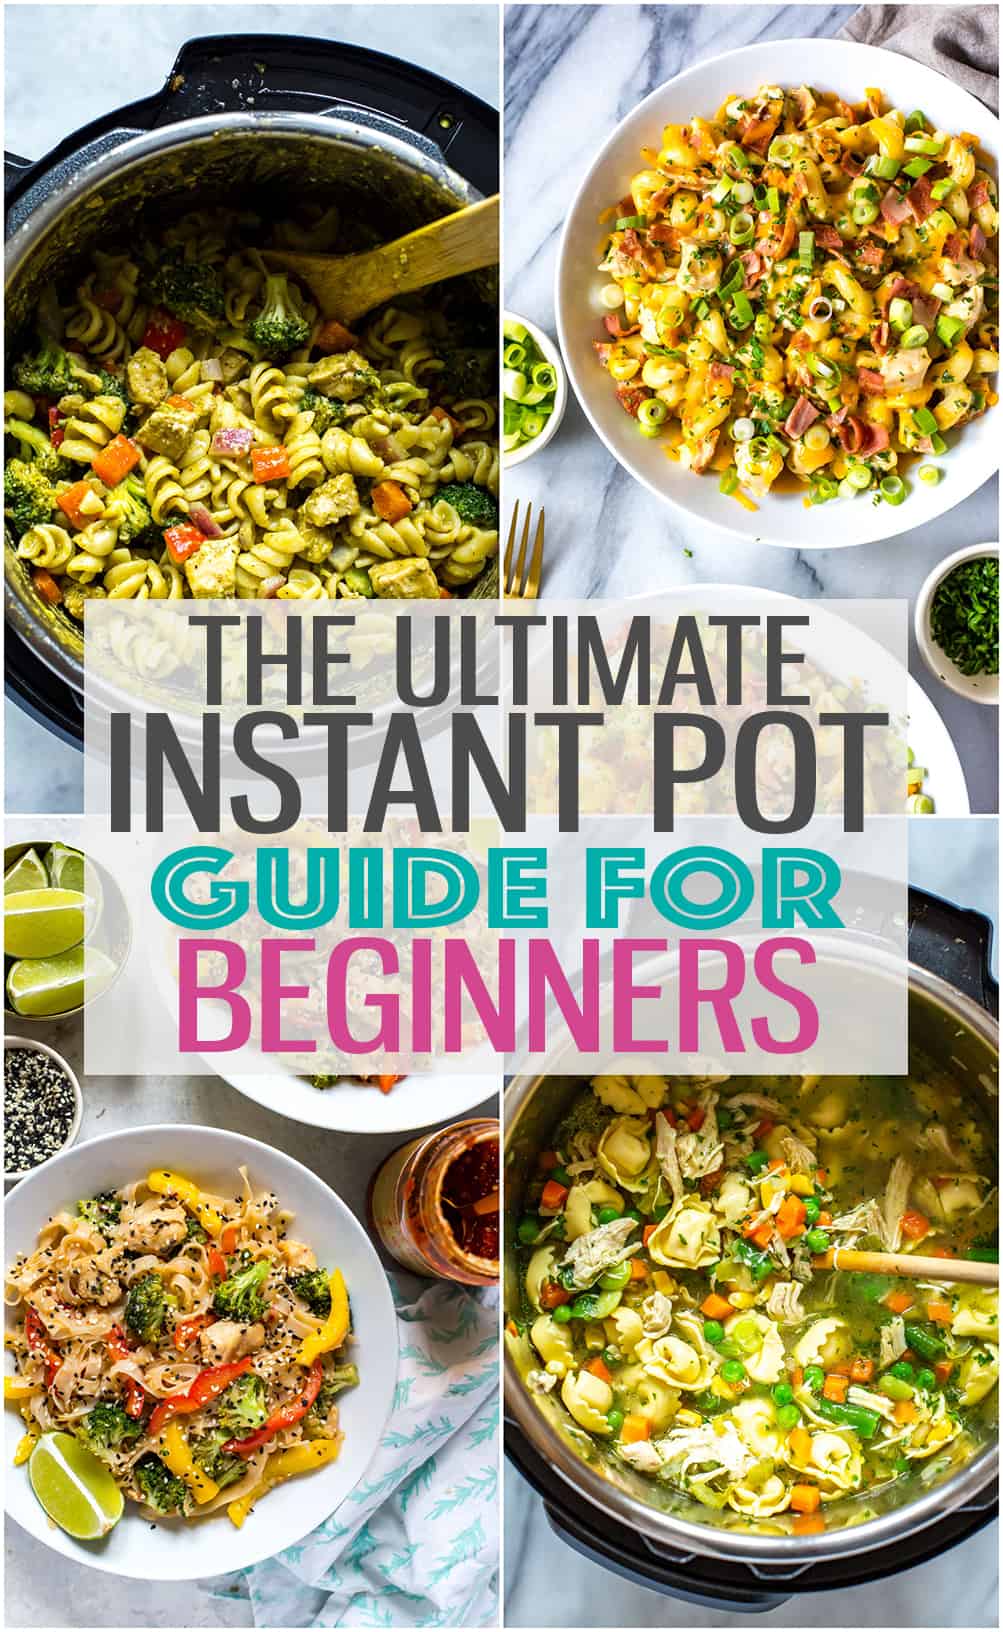 This Ultimate How to Use Instant Pot Guide will help you learn how to use your pressure cooker - includes step-by-step photos, tips, tricks and more! #InstantPot #InstantPotBeginnersguide #pressurecooking